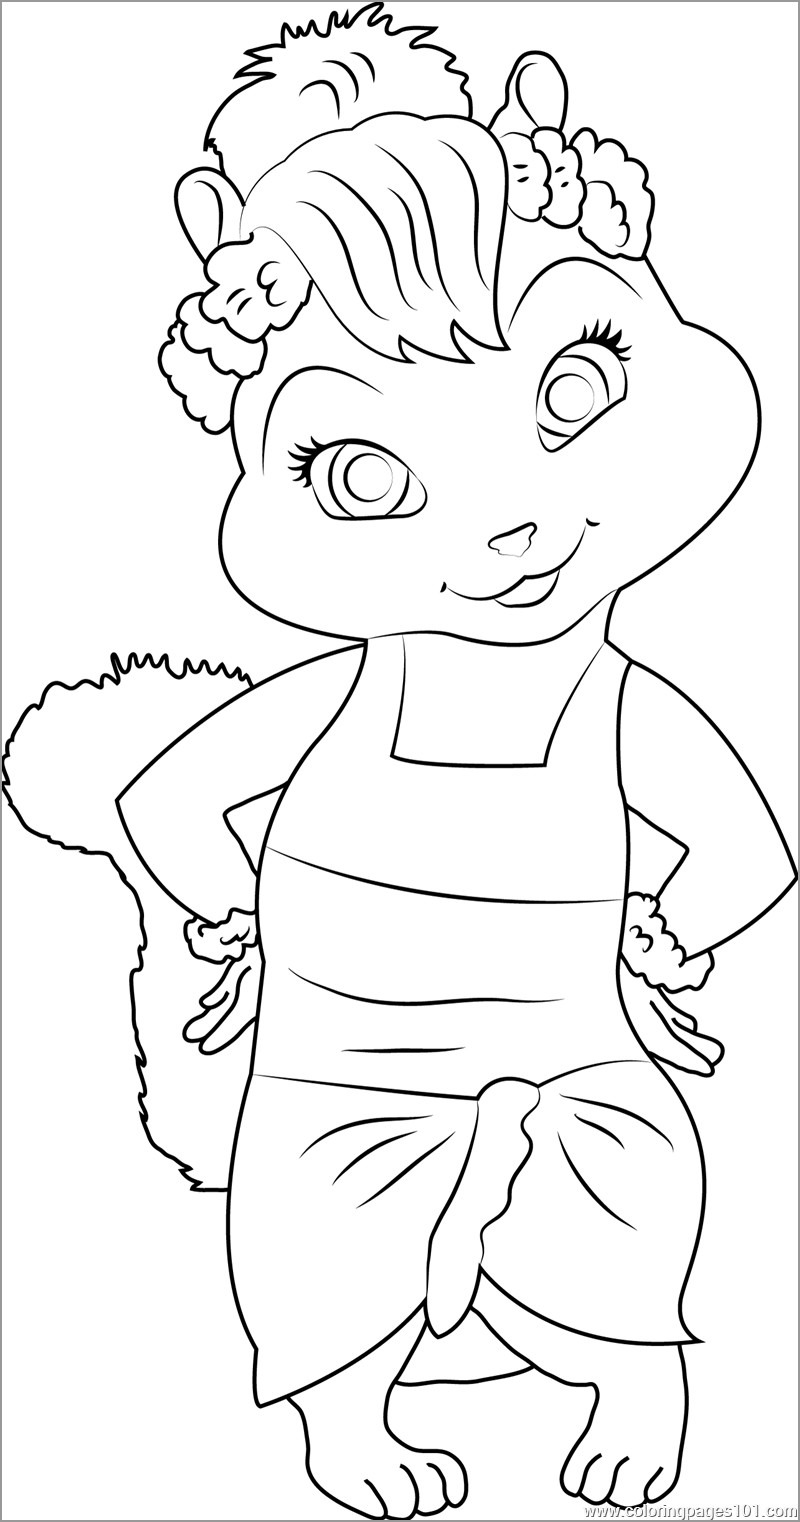 Jeanette - Alvin and the Chipmunks Coloring Pages